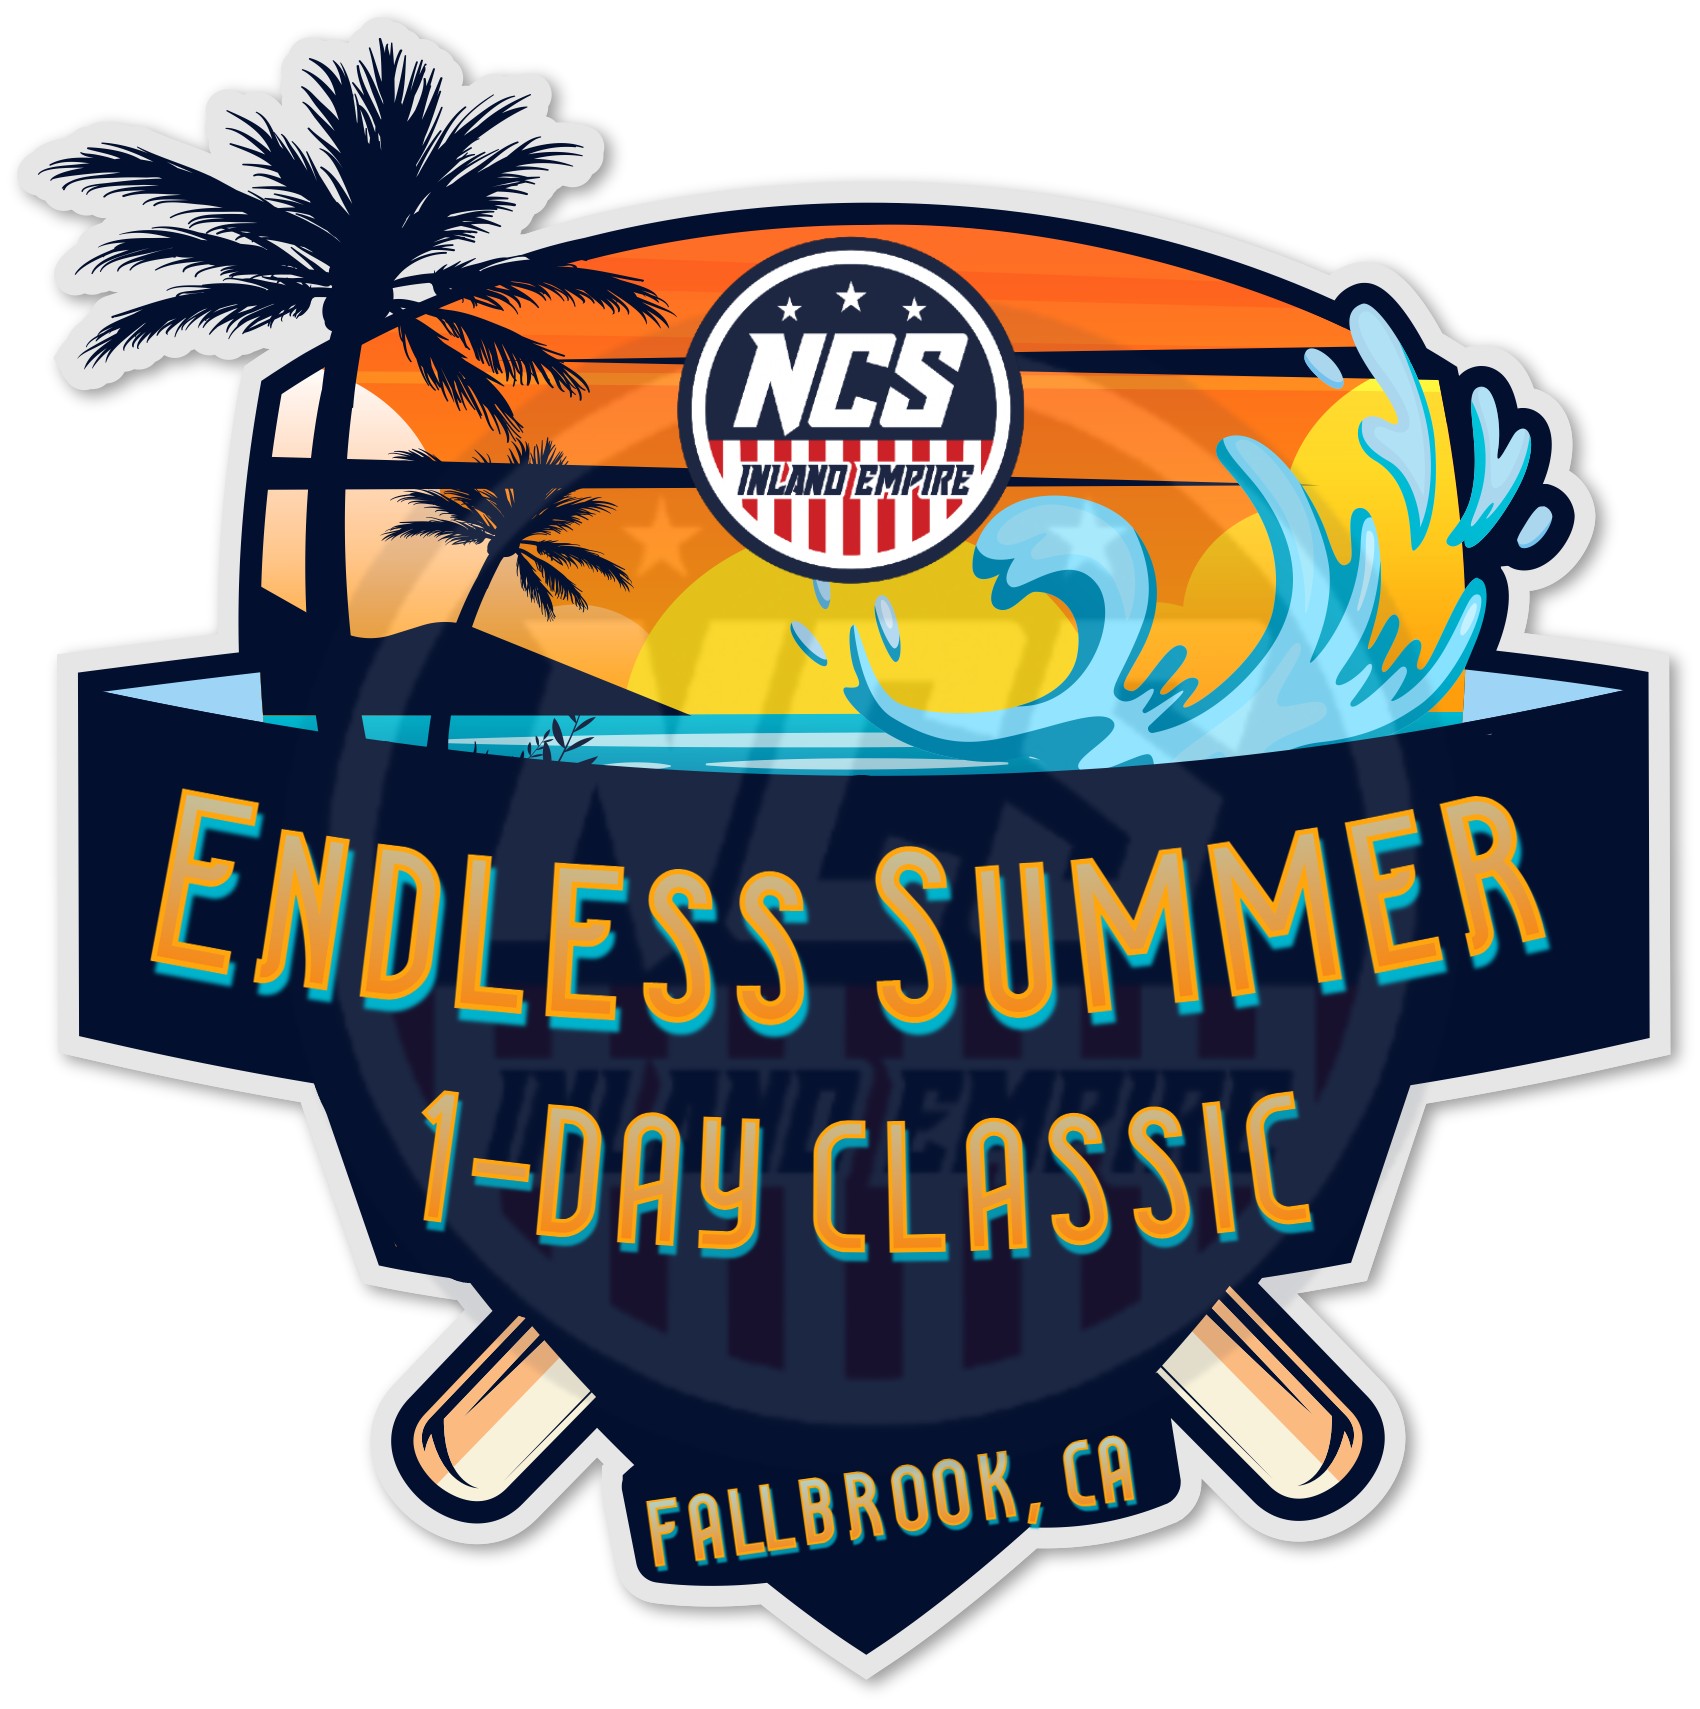 NCS INLAND EMPIRE 1-DAY Endless Summer Classic Logo